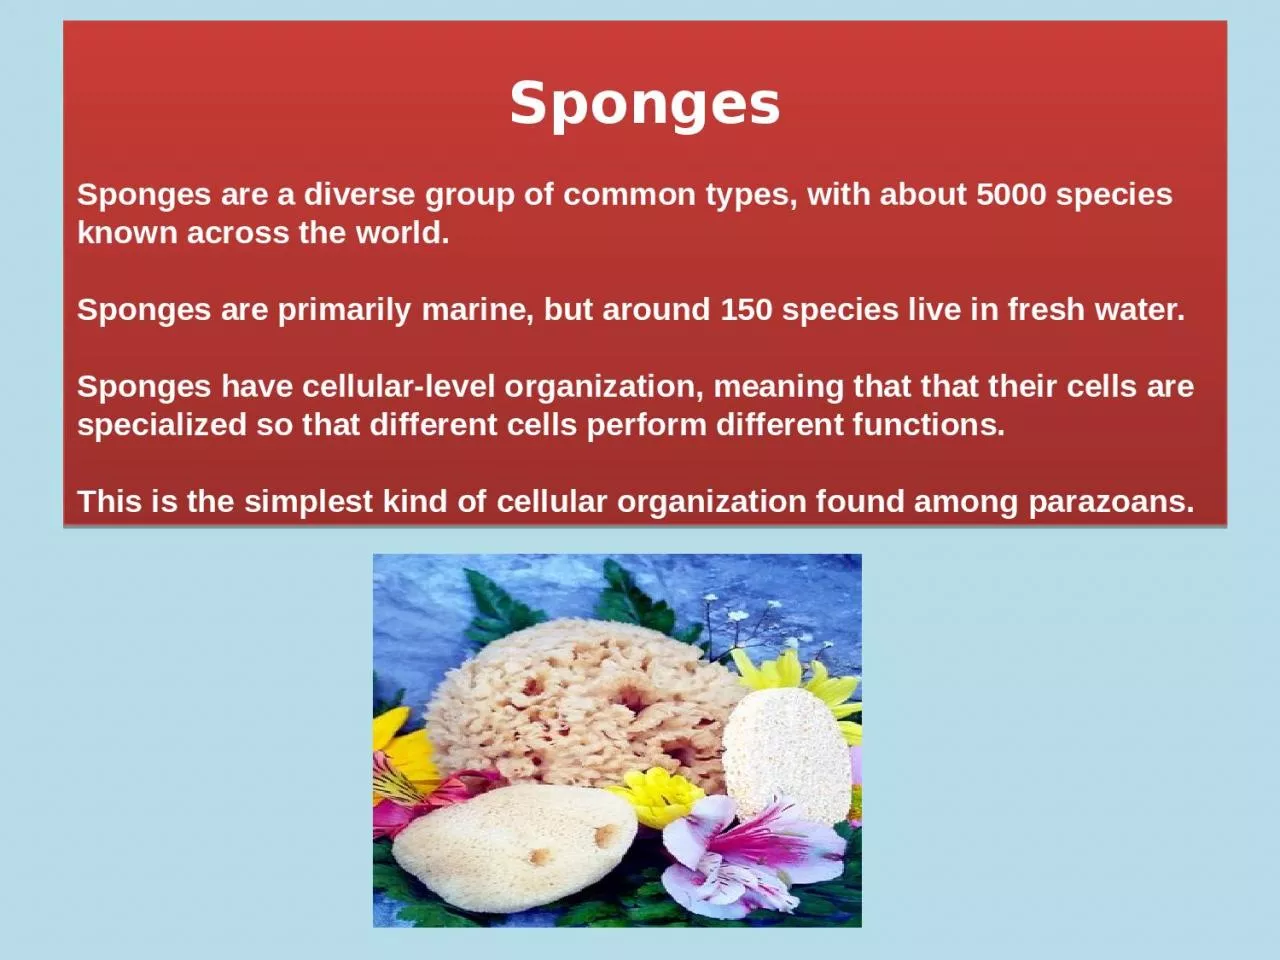 Sponges Sponges are a diverse group of common types, with about 5000 species known across